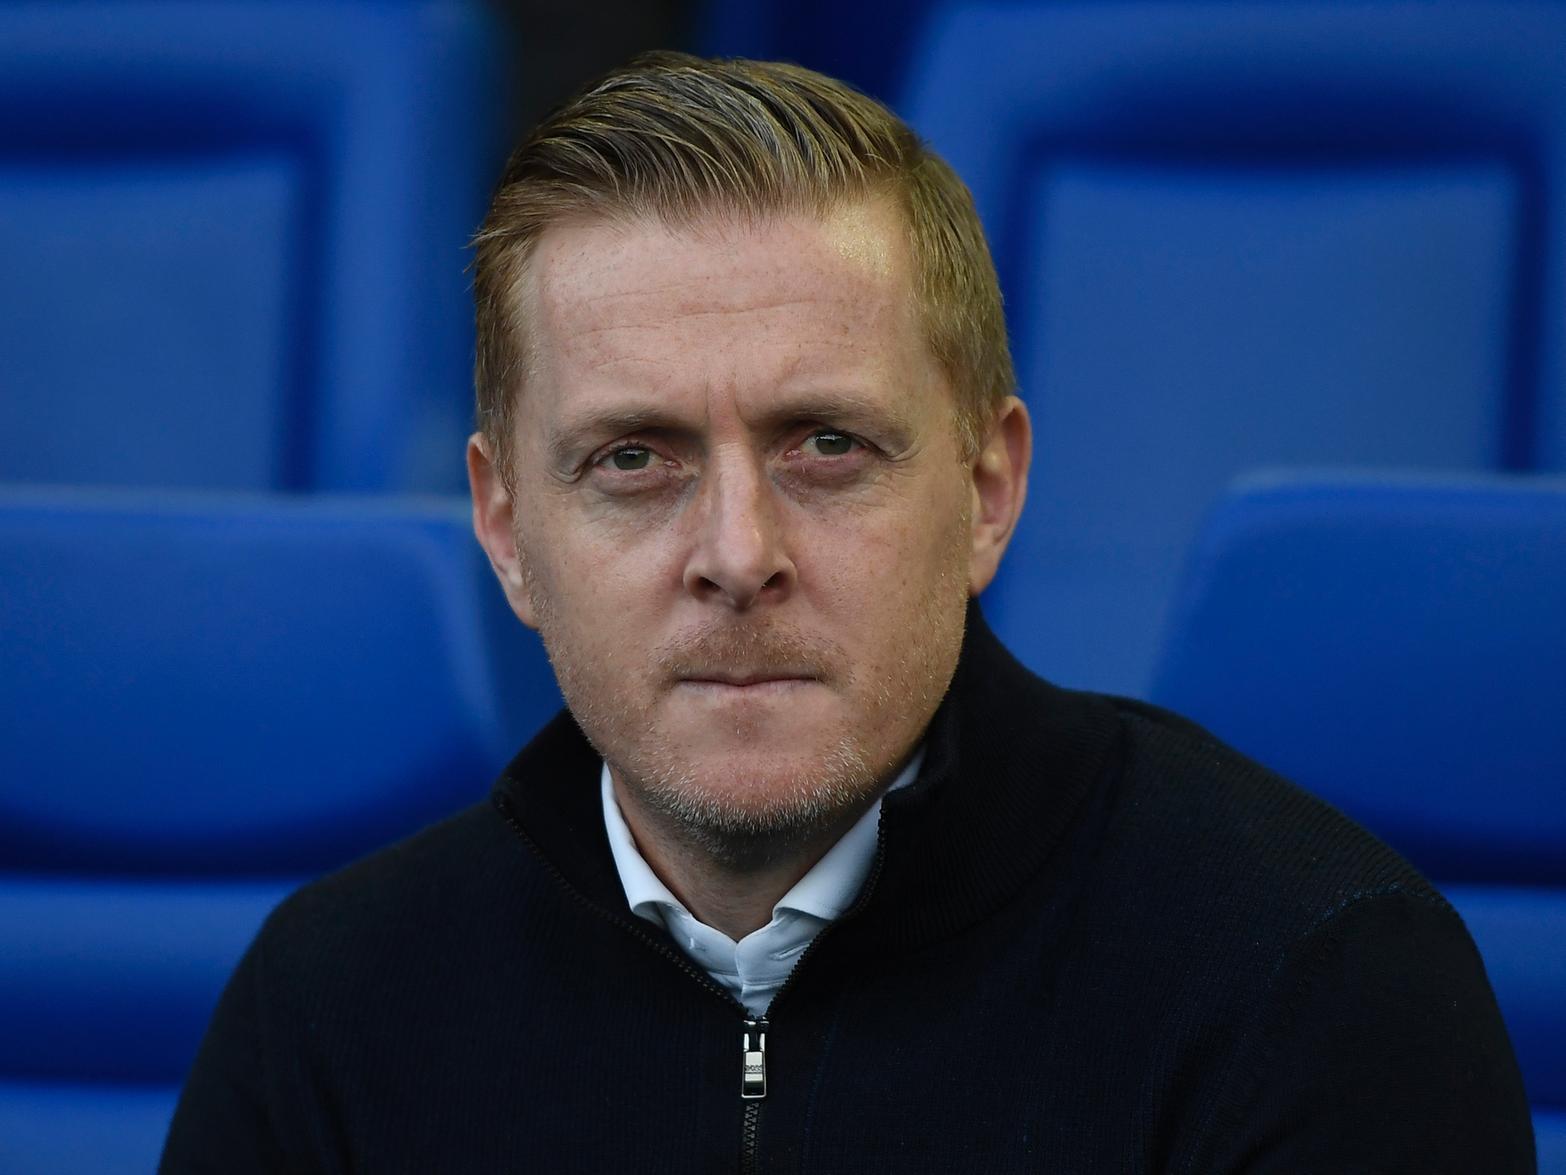 Sheffield Wednesday boss Garry Monk has claimed the side's recent home form has been "simply not good enough", and vowed to do his utmost to ensure his team end their dismal run without a win. (Sheffield Star)